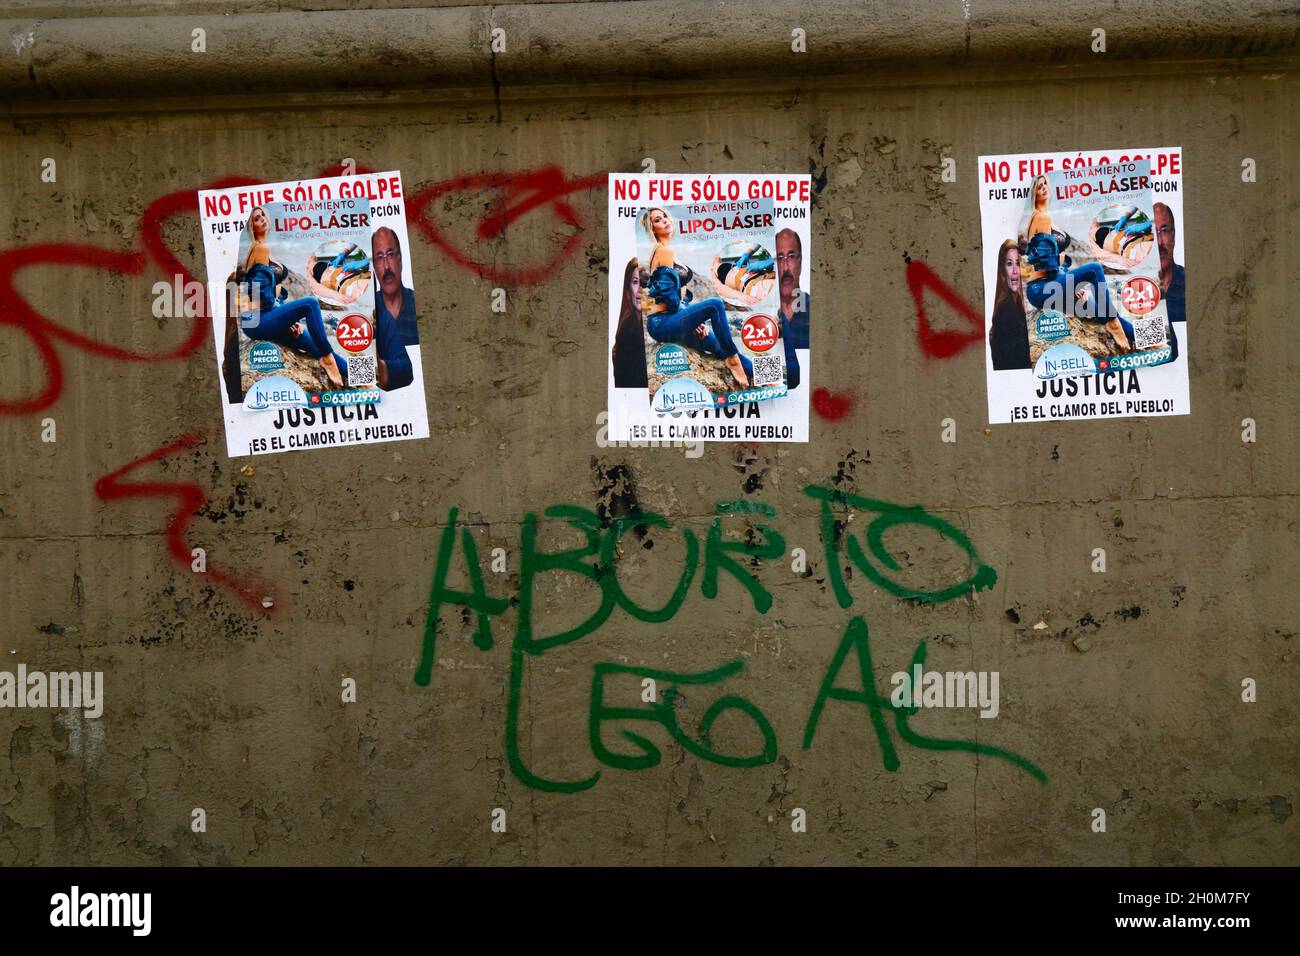 Feminist graffiti on base of monument demanding the right to legal abortion for women. Above it are posters offering 2 for 1 laser liposuction surgery pasted over left wing posters demanding justice for a supposed coup after the controversial presidential elections of 20th October 2019. Av 16 de Julio / El Prado, La Paz, Bolivia Stock Photo